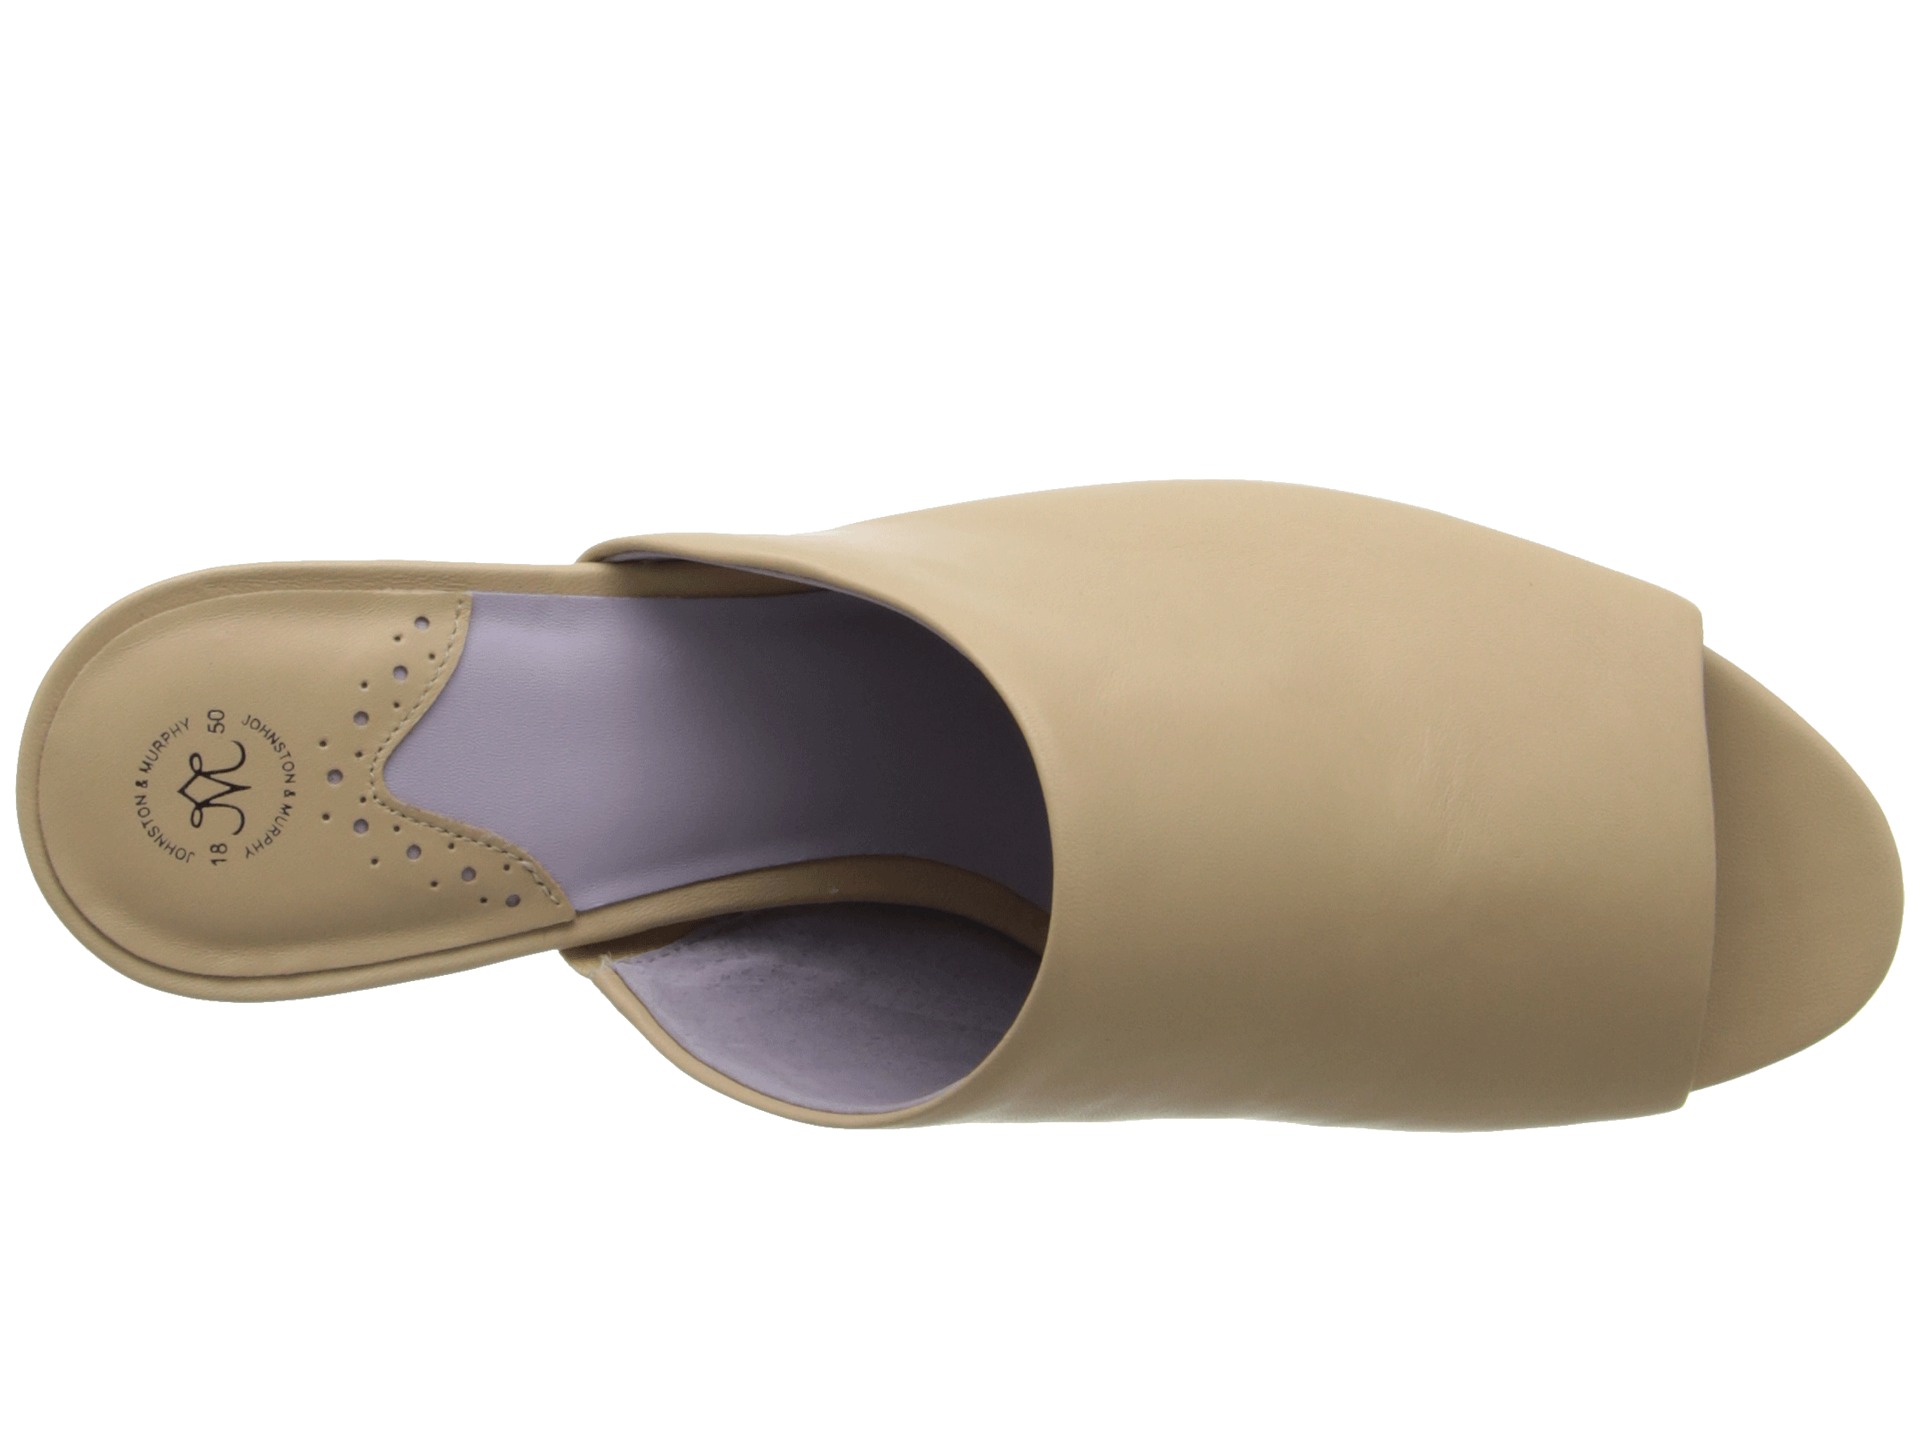 Johnston Murphy Kallie One Banded Slide | Shipped Free at Zappos